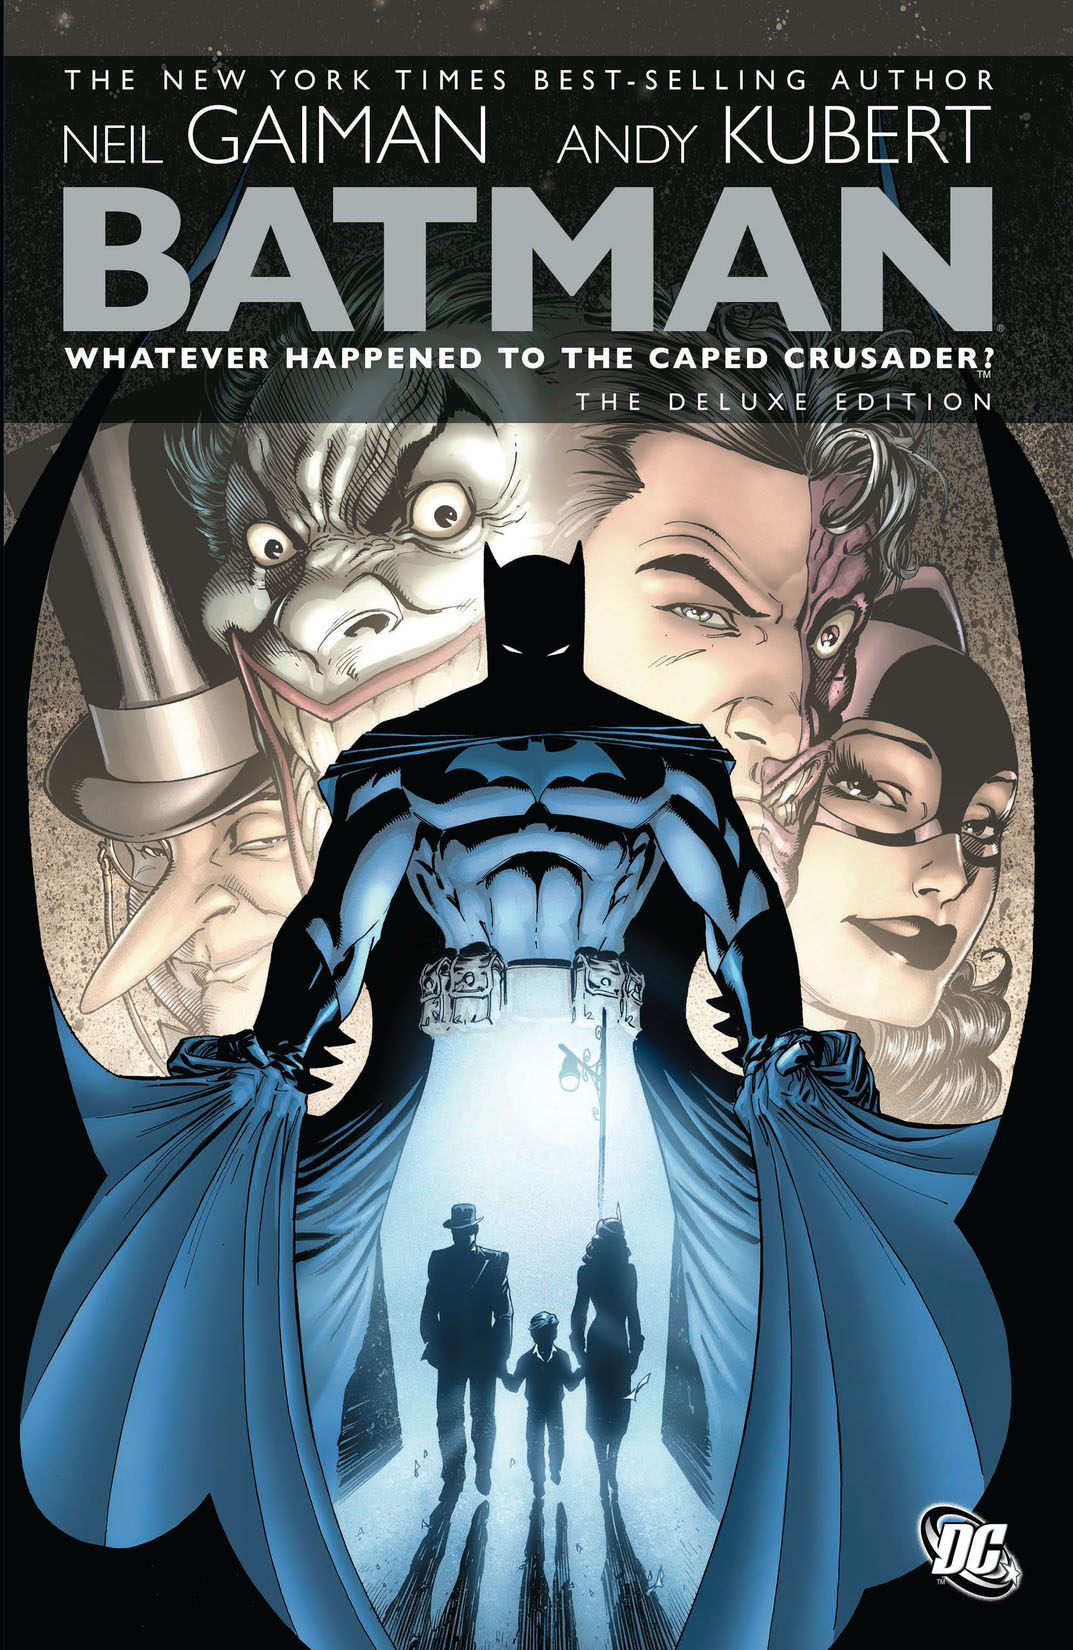 Batman: Whatever Happened to the Caped Crusader preview images